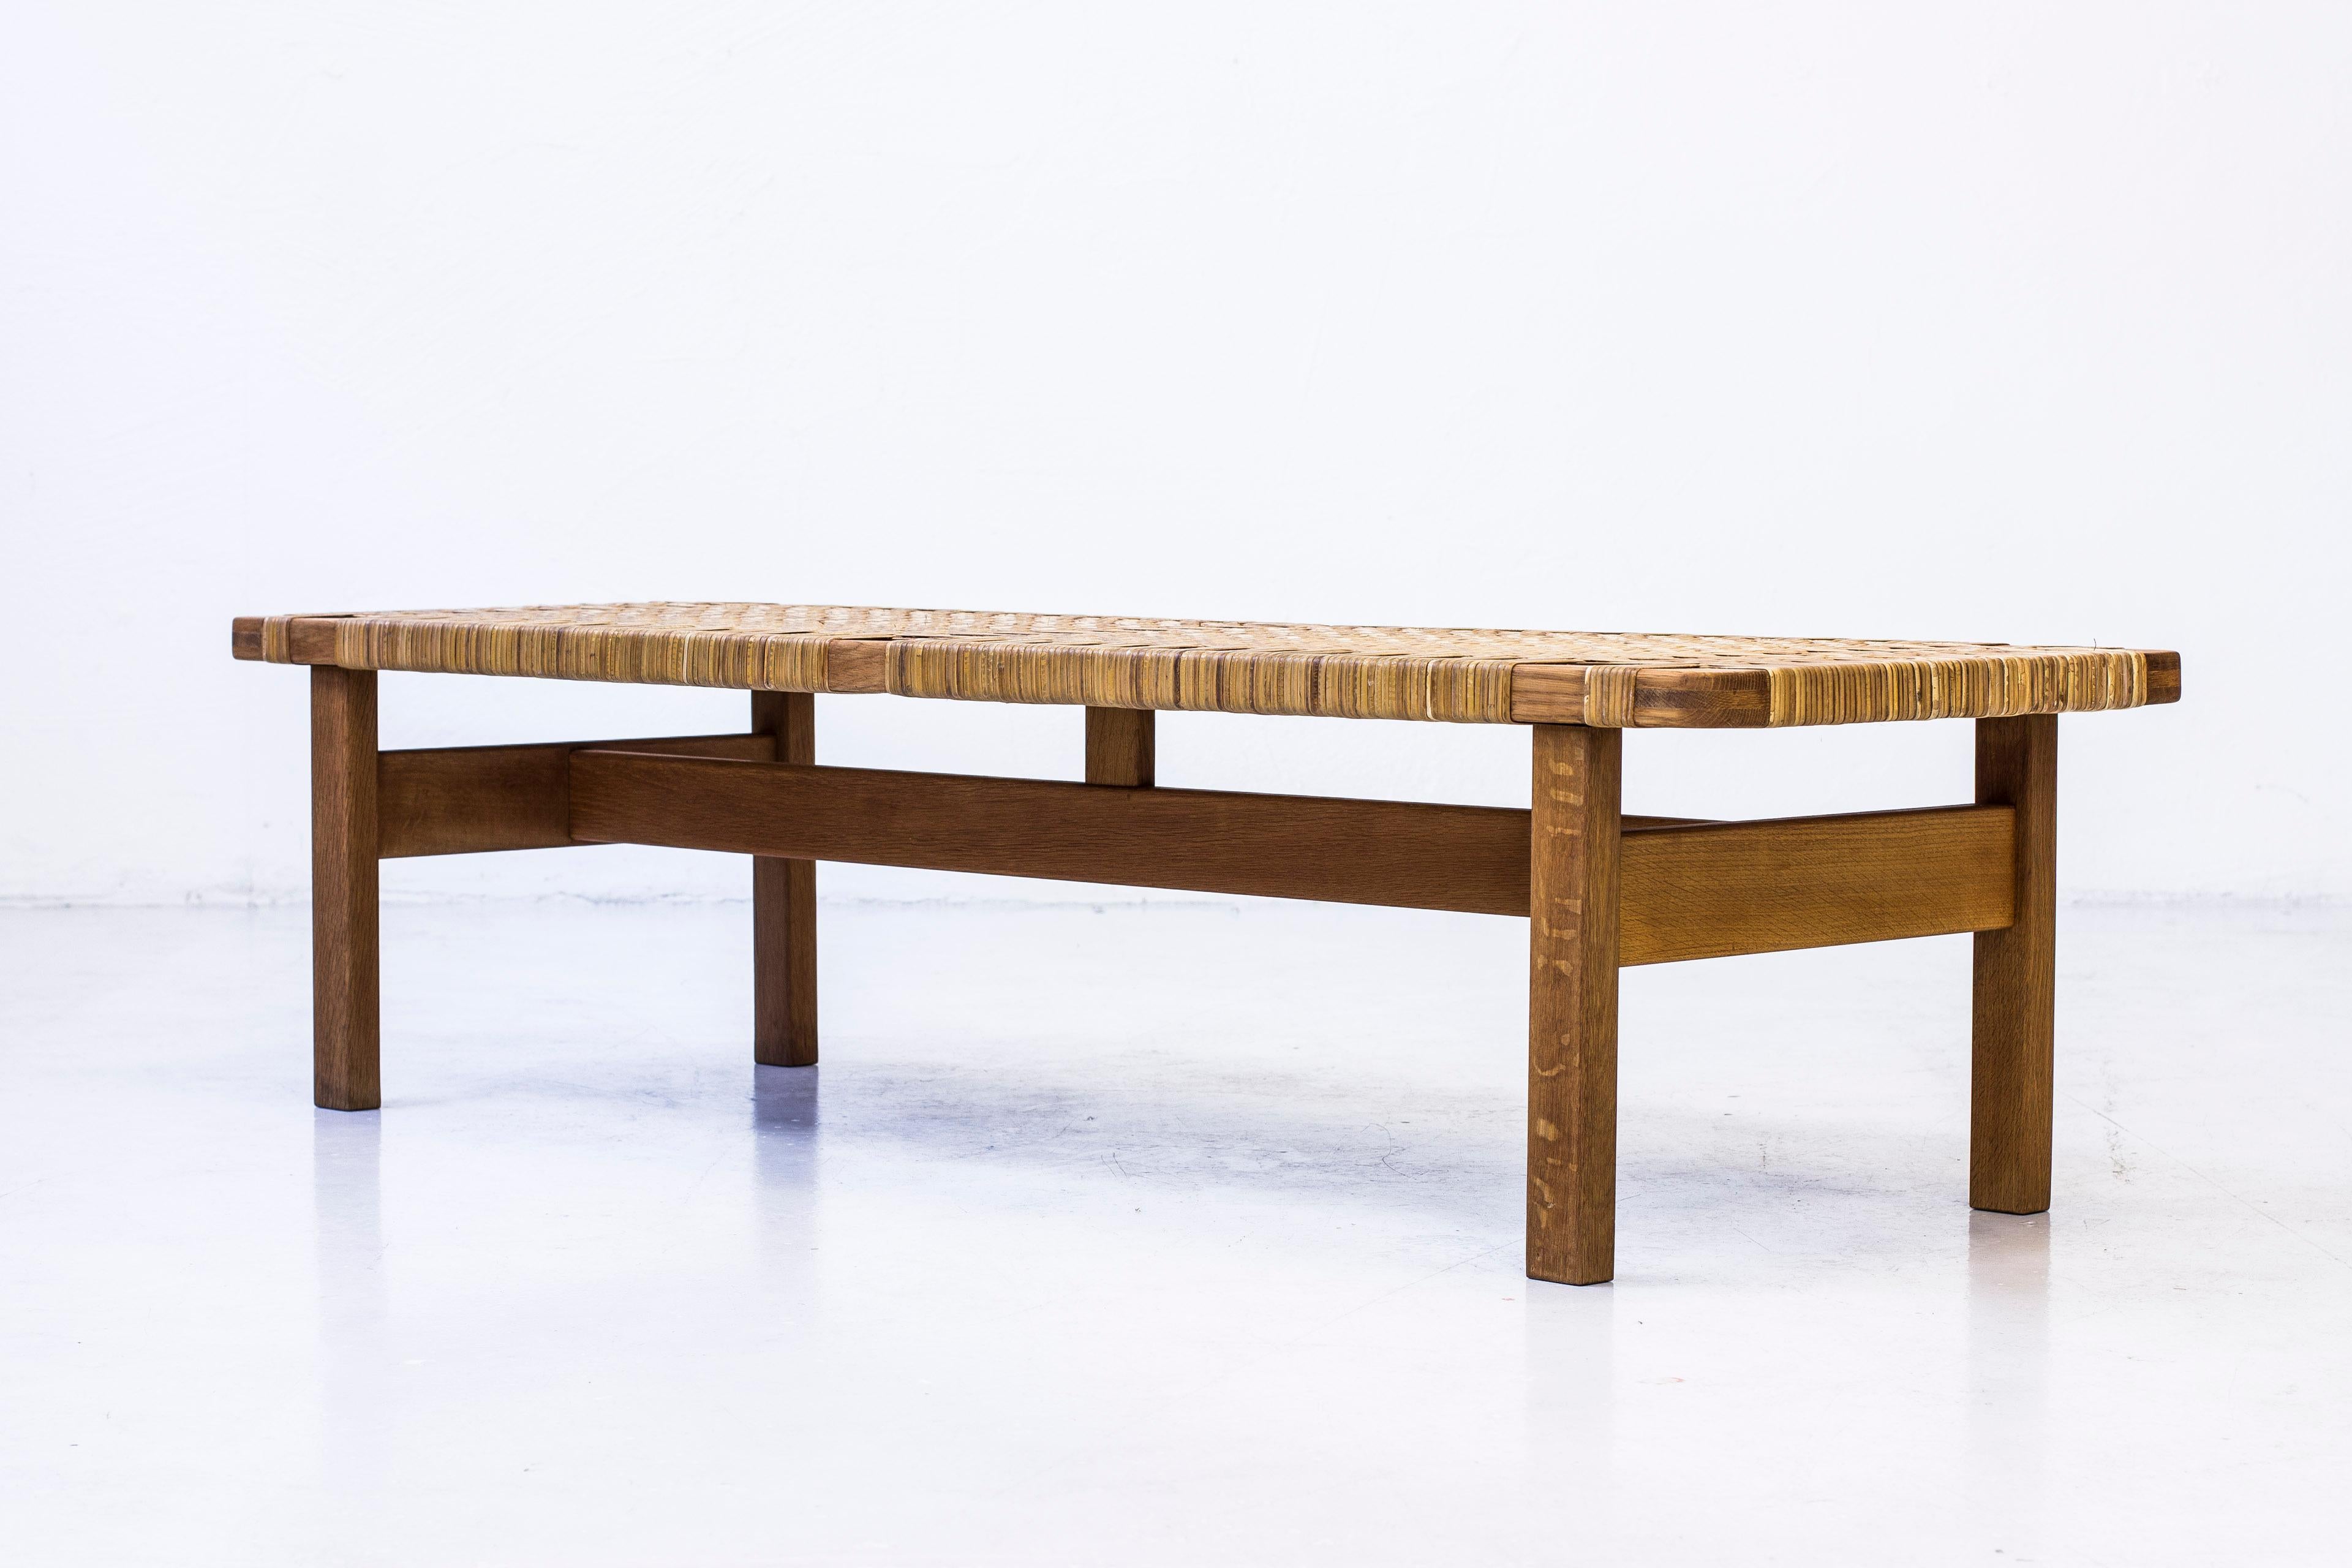 Bench or sofa/side table designed by Børge Mogensen. Produced in Denmark by Fredericia furniture during the 1950s. Made from solid oak with woven cane as tabletop or sitting surface. Excellent condition with light age related wear and patina.
 